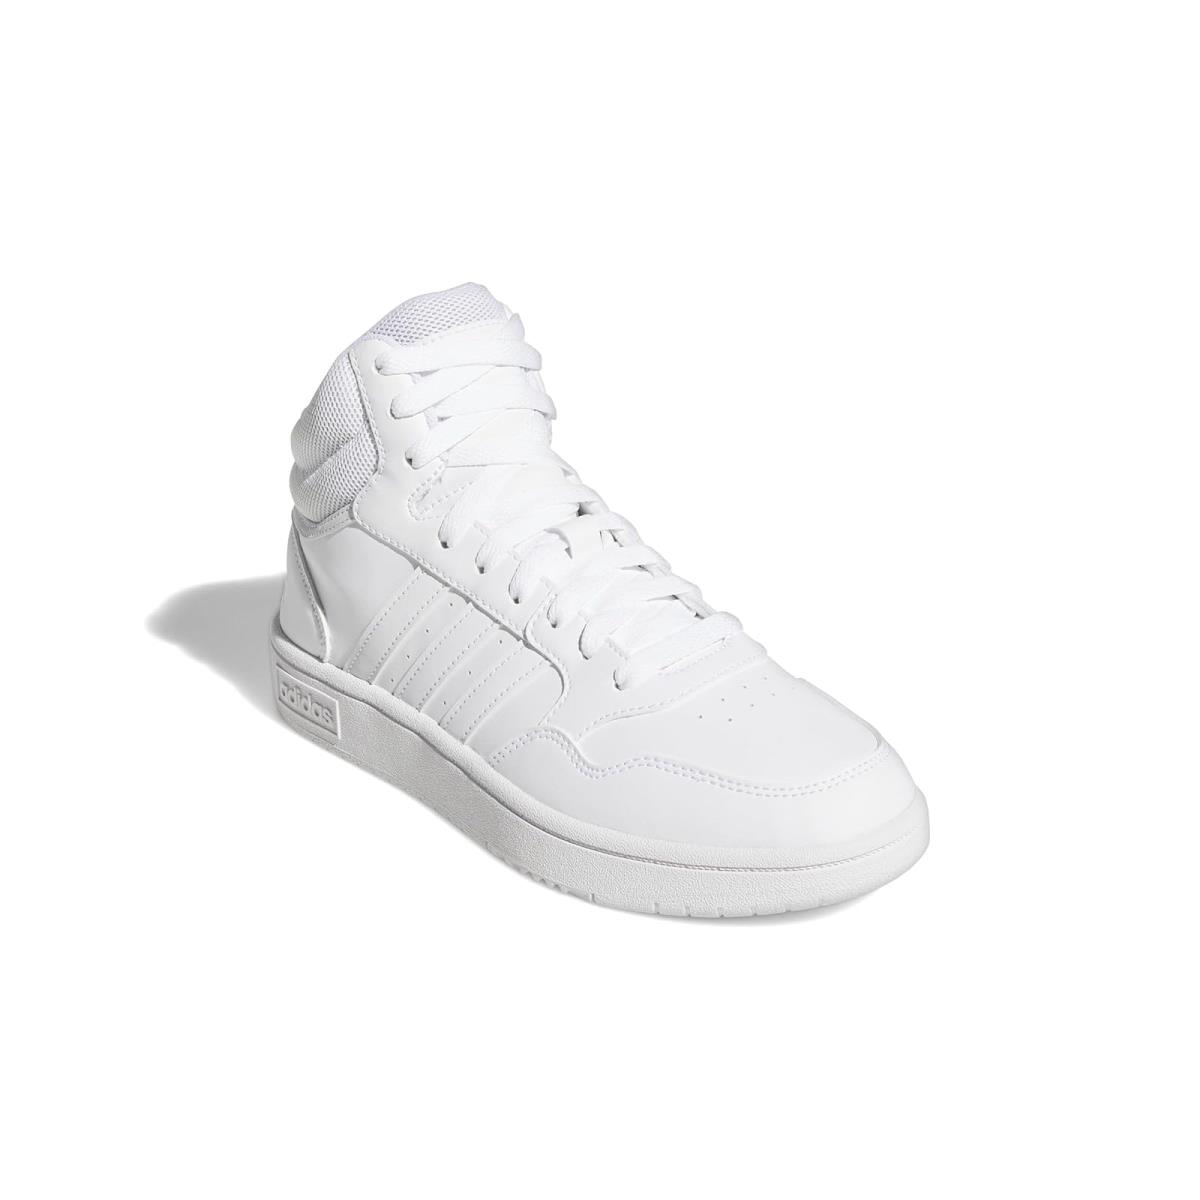 Woman`s Sneakers Athletic Shoes Adidas Originals Hoops 3.0 Mid White/White/Dash Grey